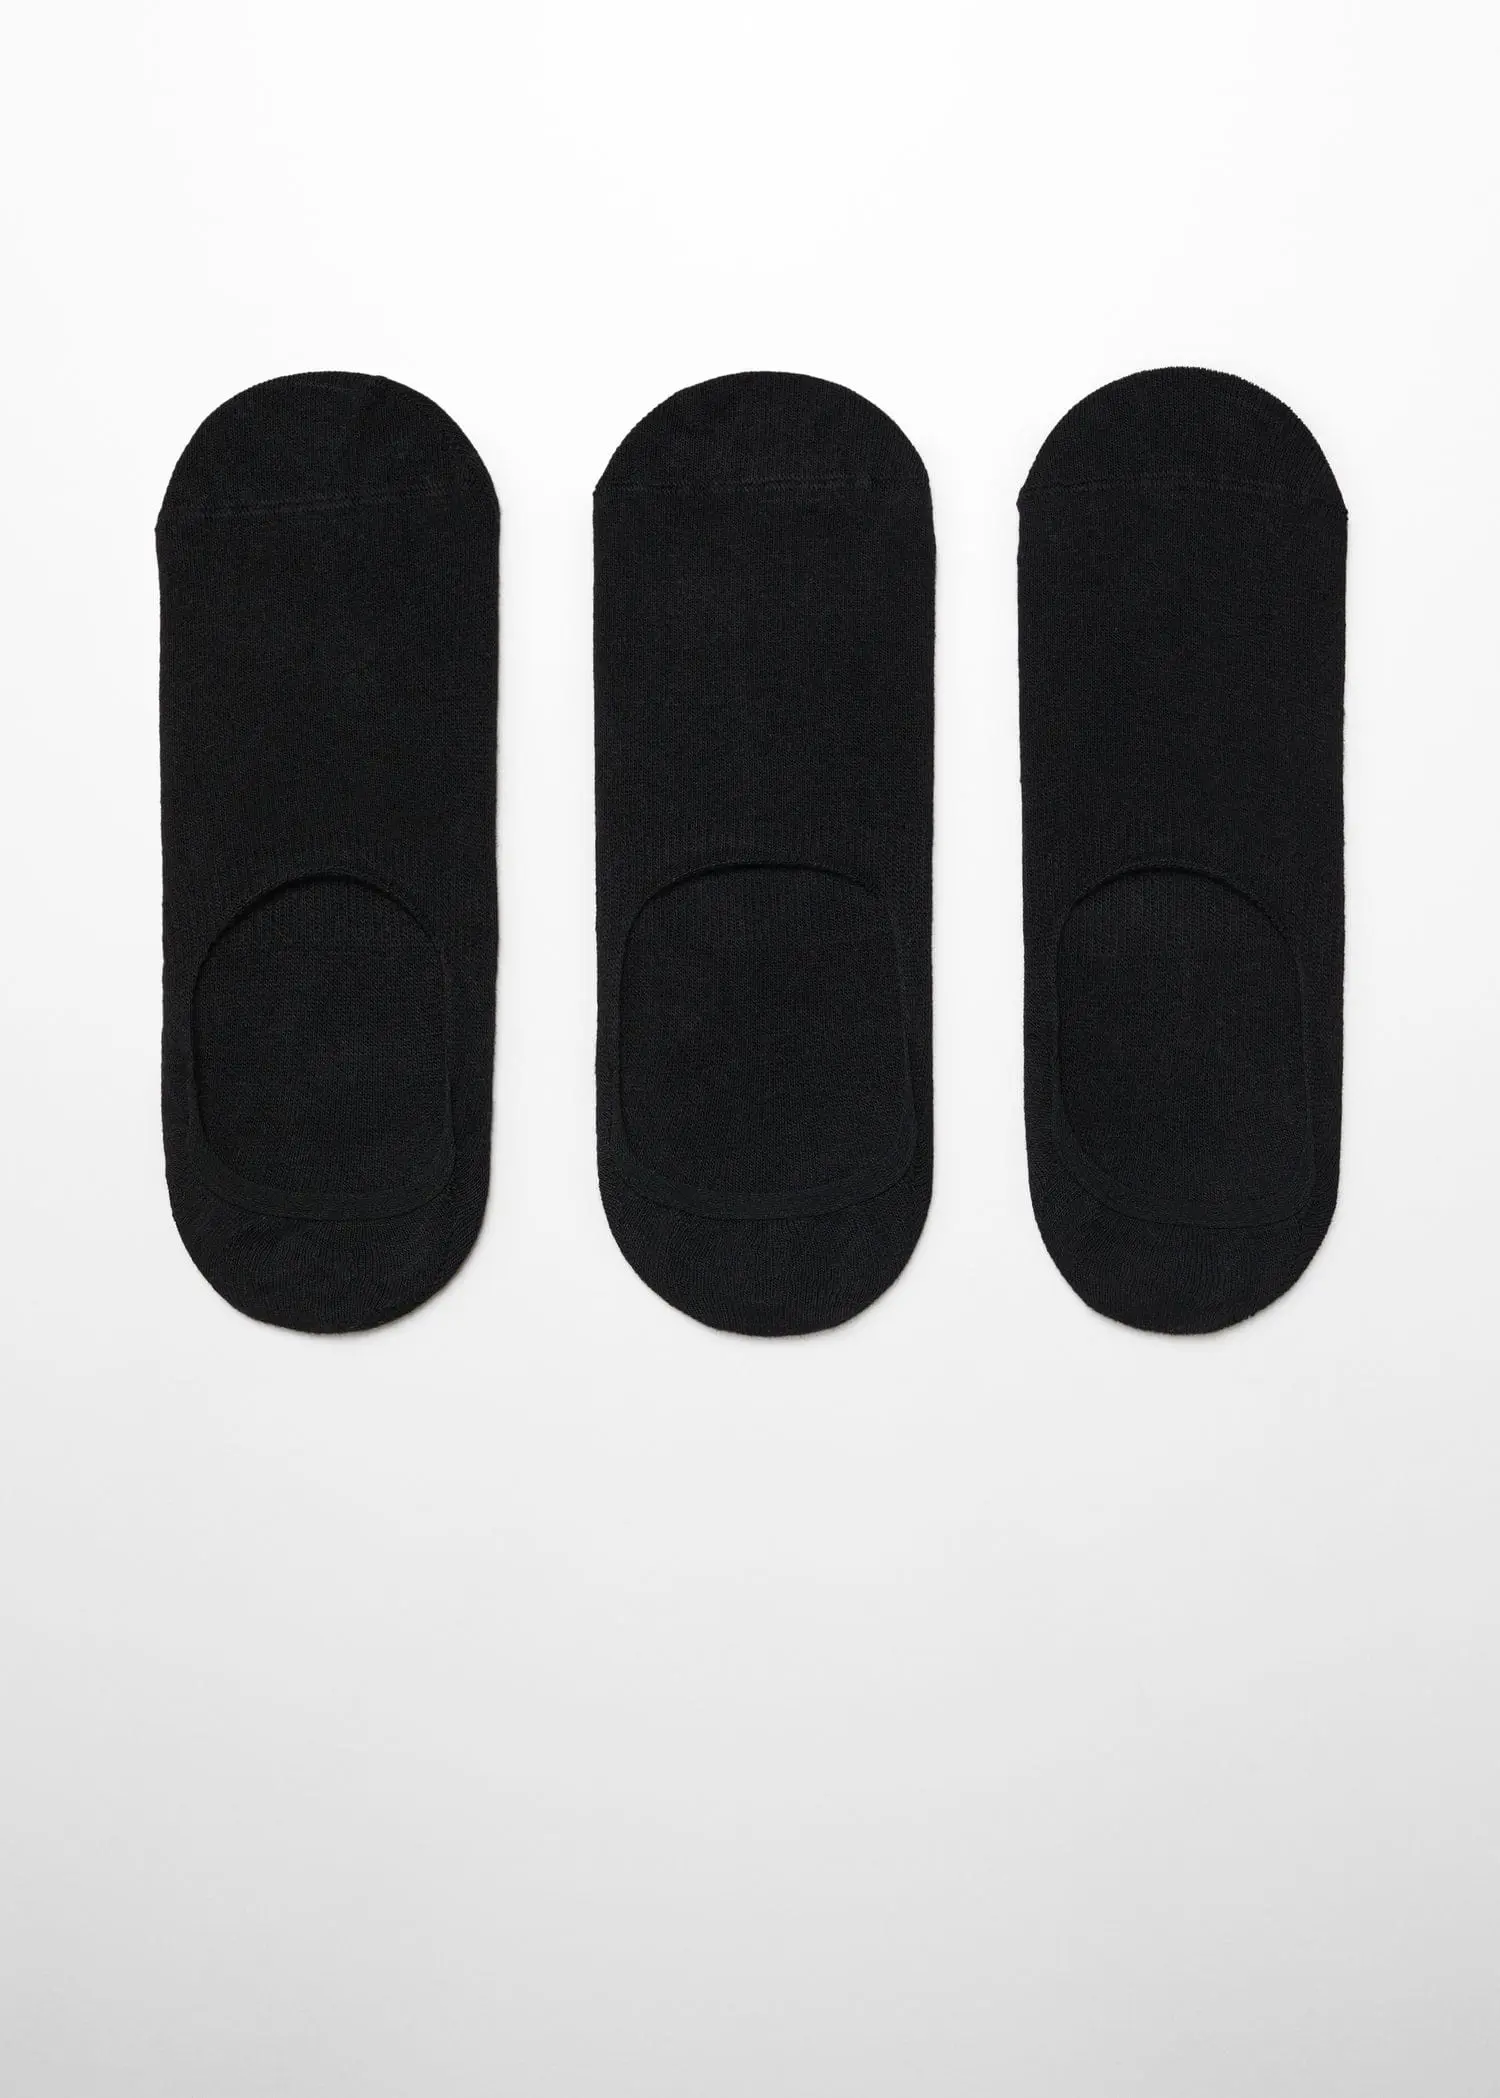 Mango 3-pack of invisible socks. 2